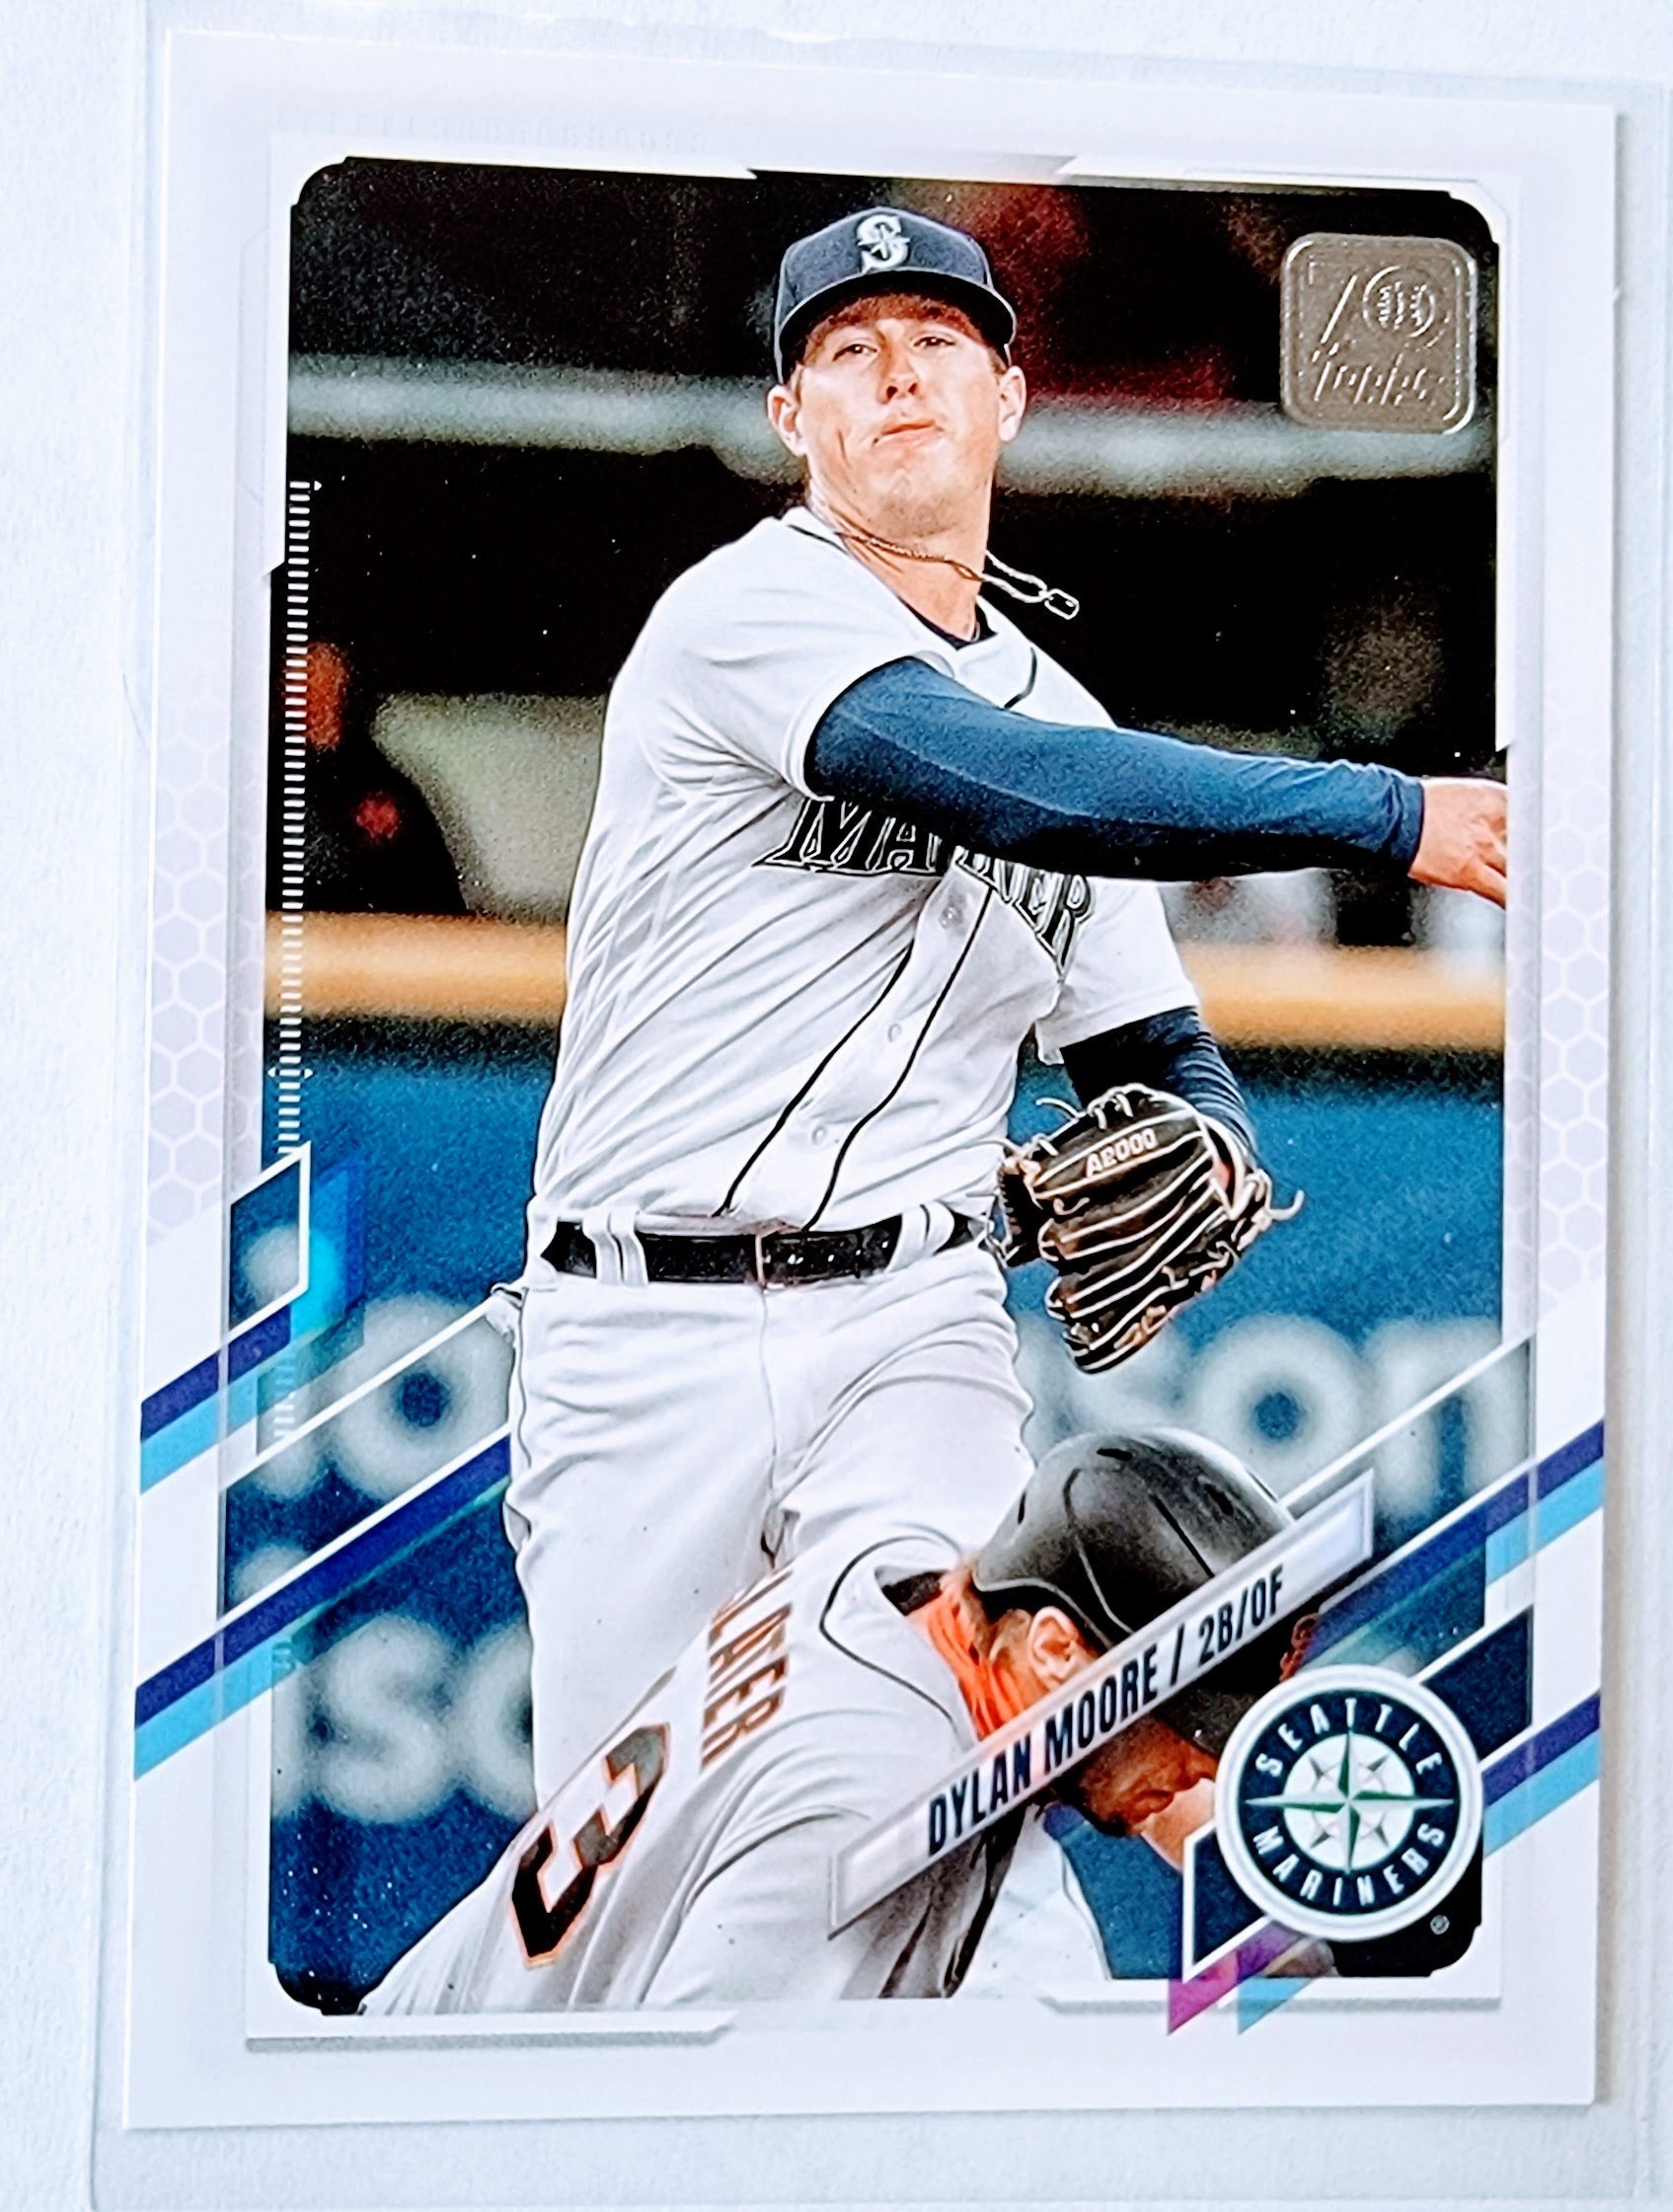 2021 Topps Update Dylan Moore Baseball Trading Card SMCB1 simple Xclusive Collectibles   